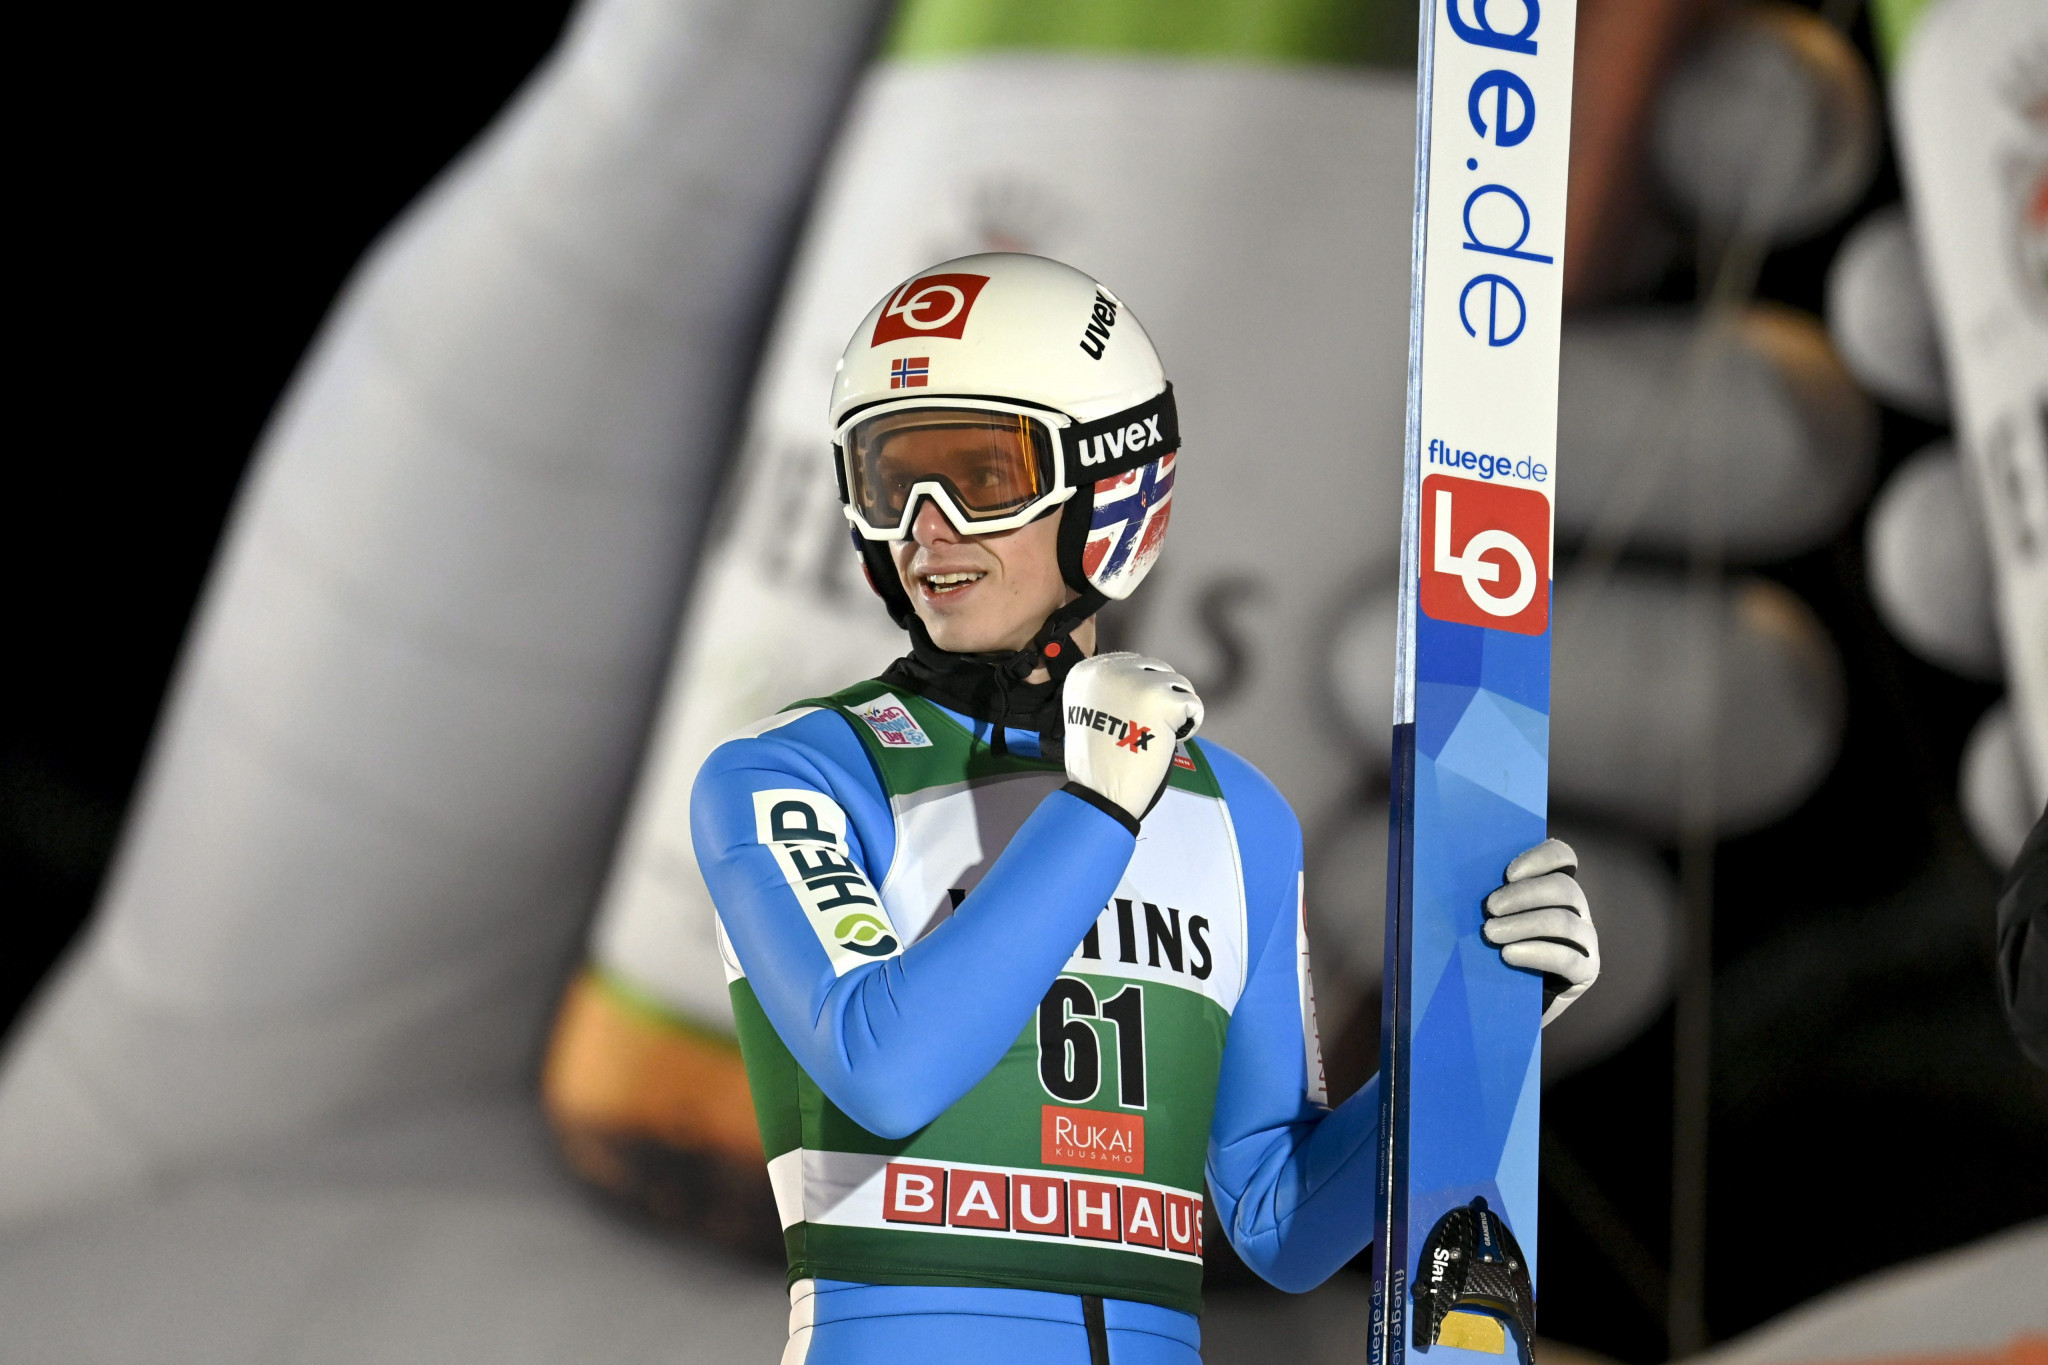 Halvor Egner Granerud won the FIS Ski Jumping World Cup event in Ruka ©Getty Images